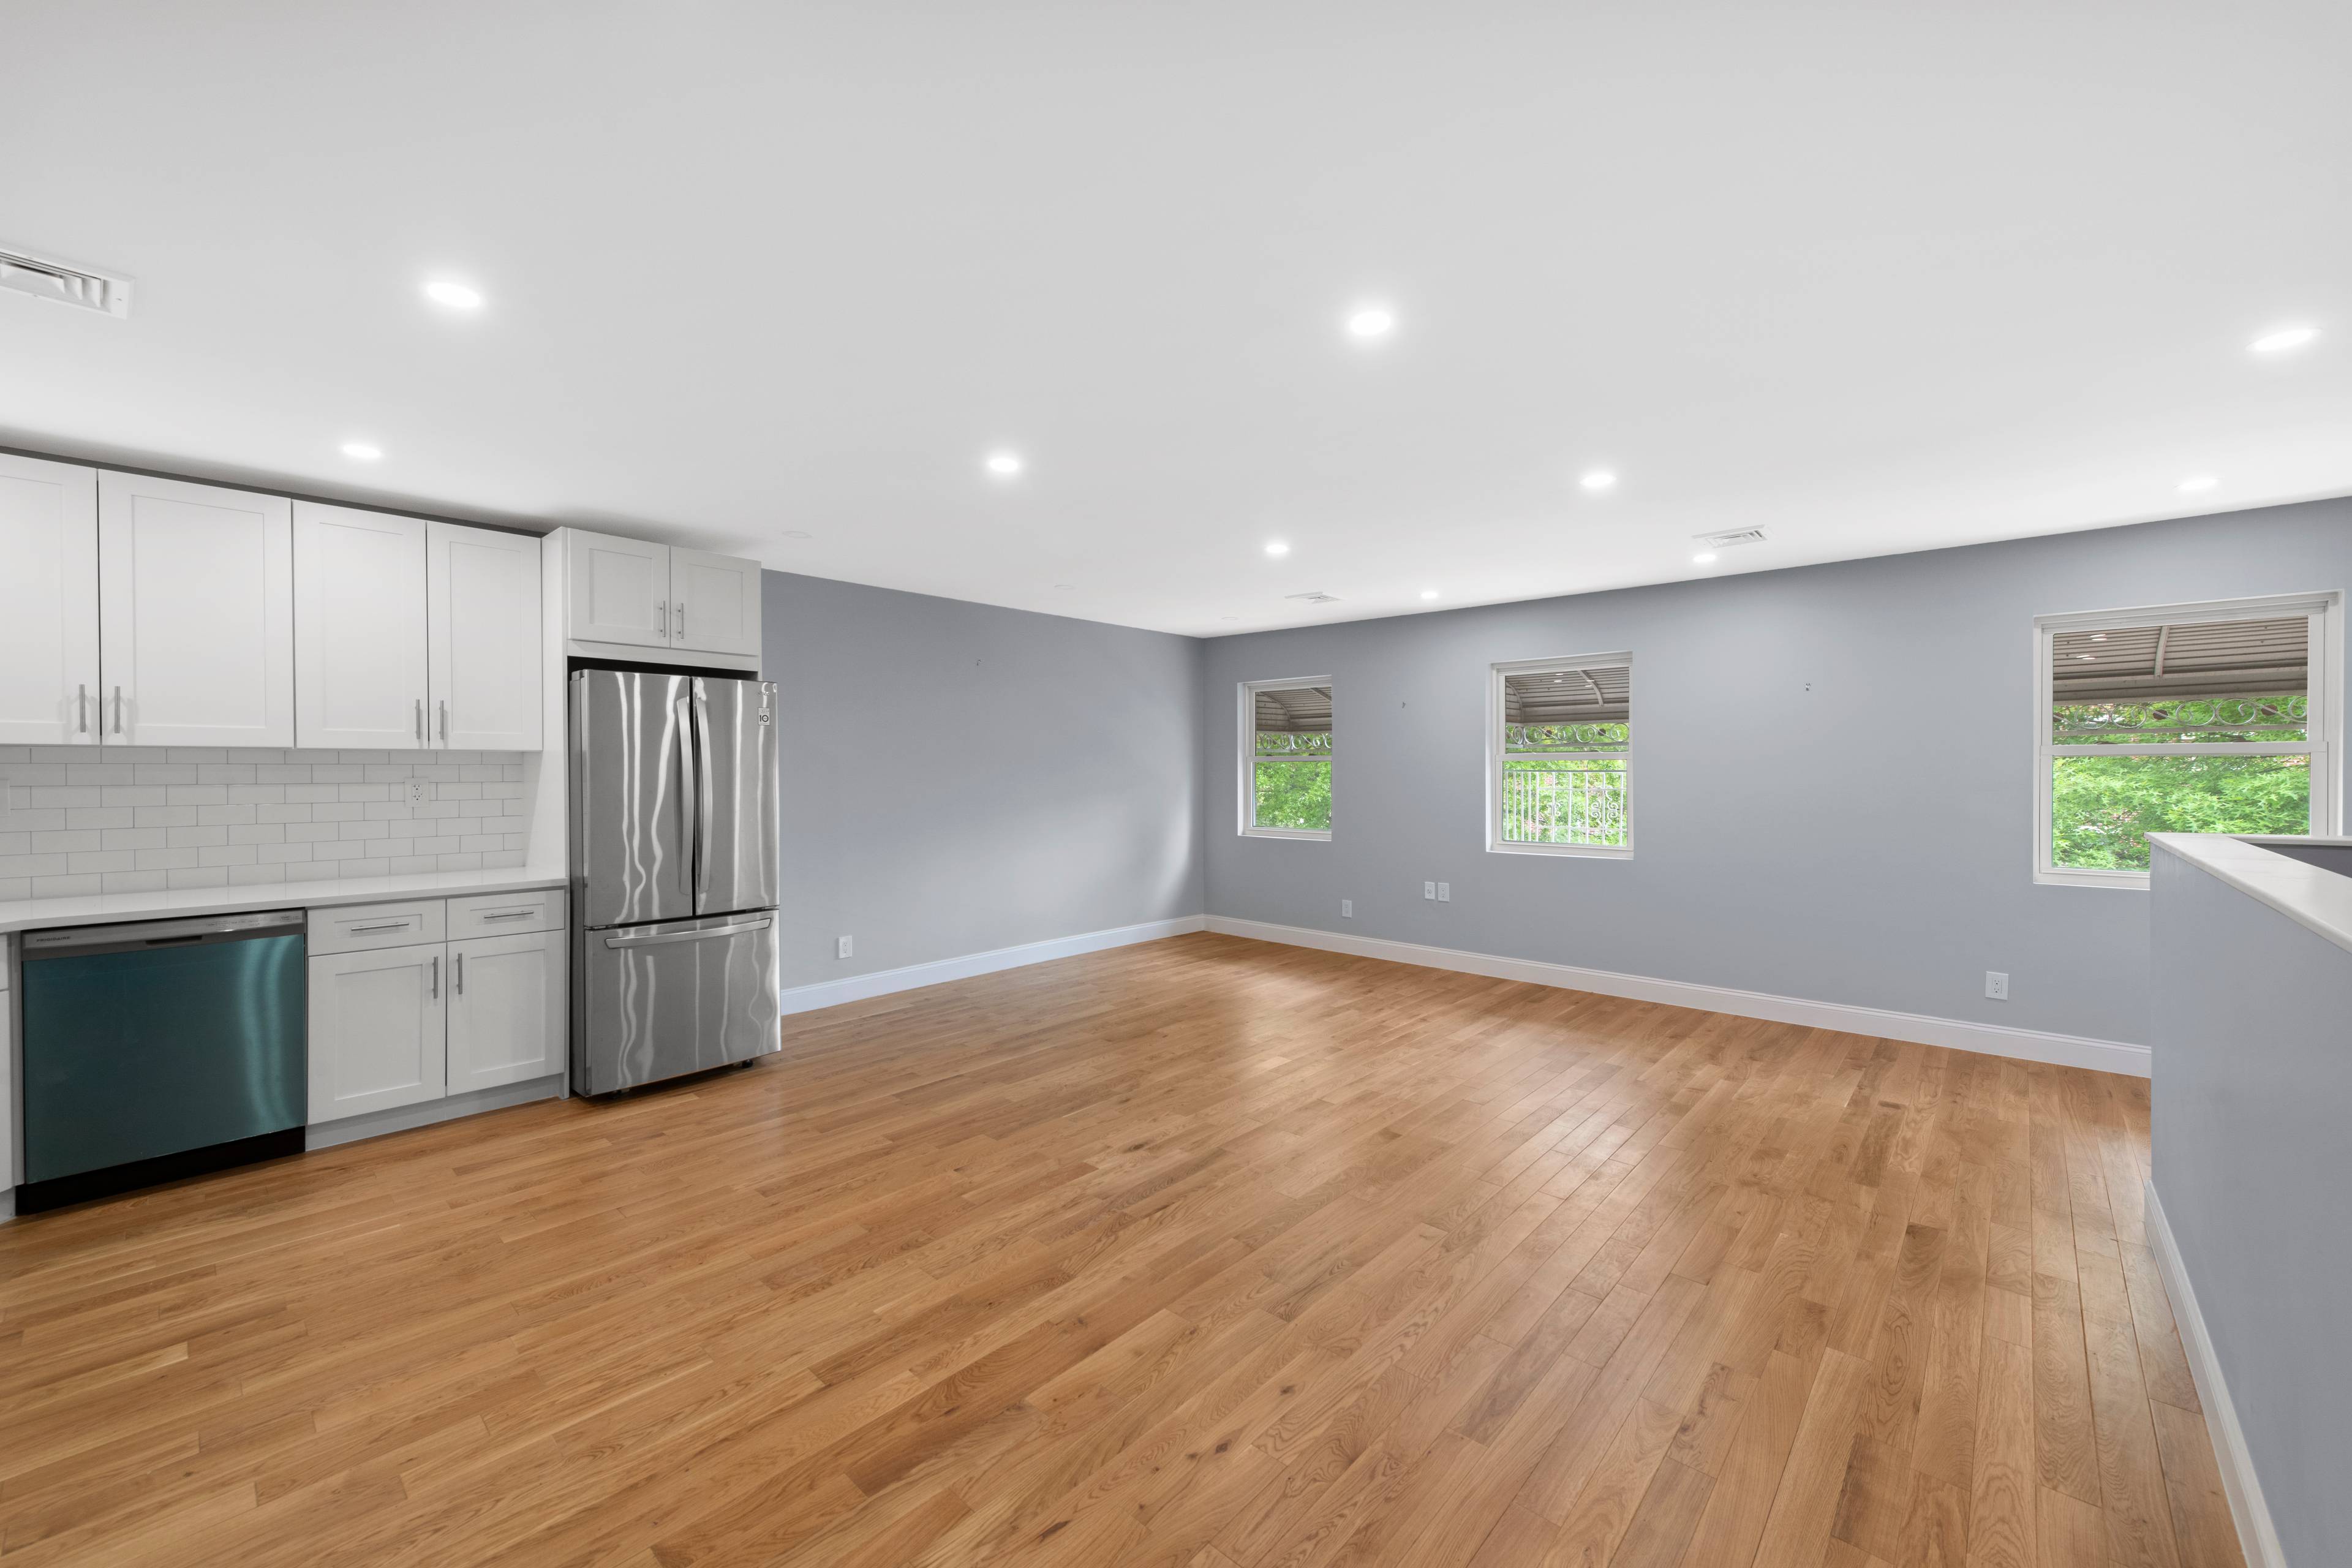 Beautiful, bright and airy, recently renovated three bedroom and one bath apartment comes with three generous sized bedrooms, open kitchen with stainless steel appliances, hardwood floors throughout, and tons of ...